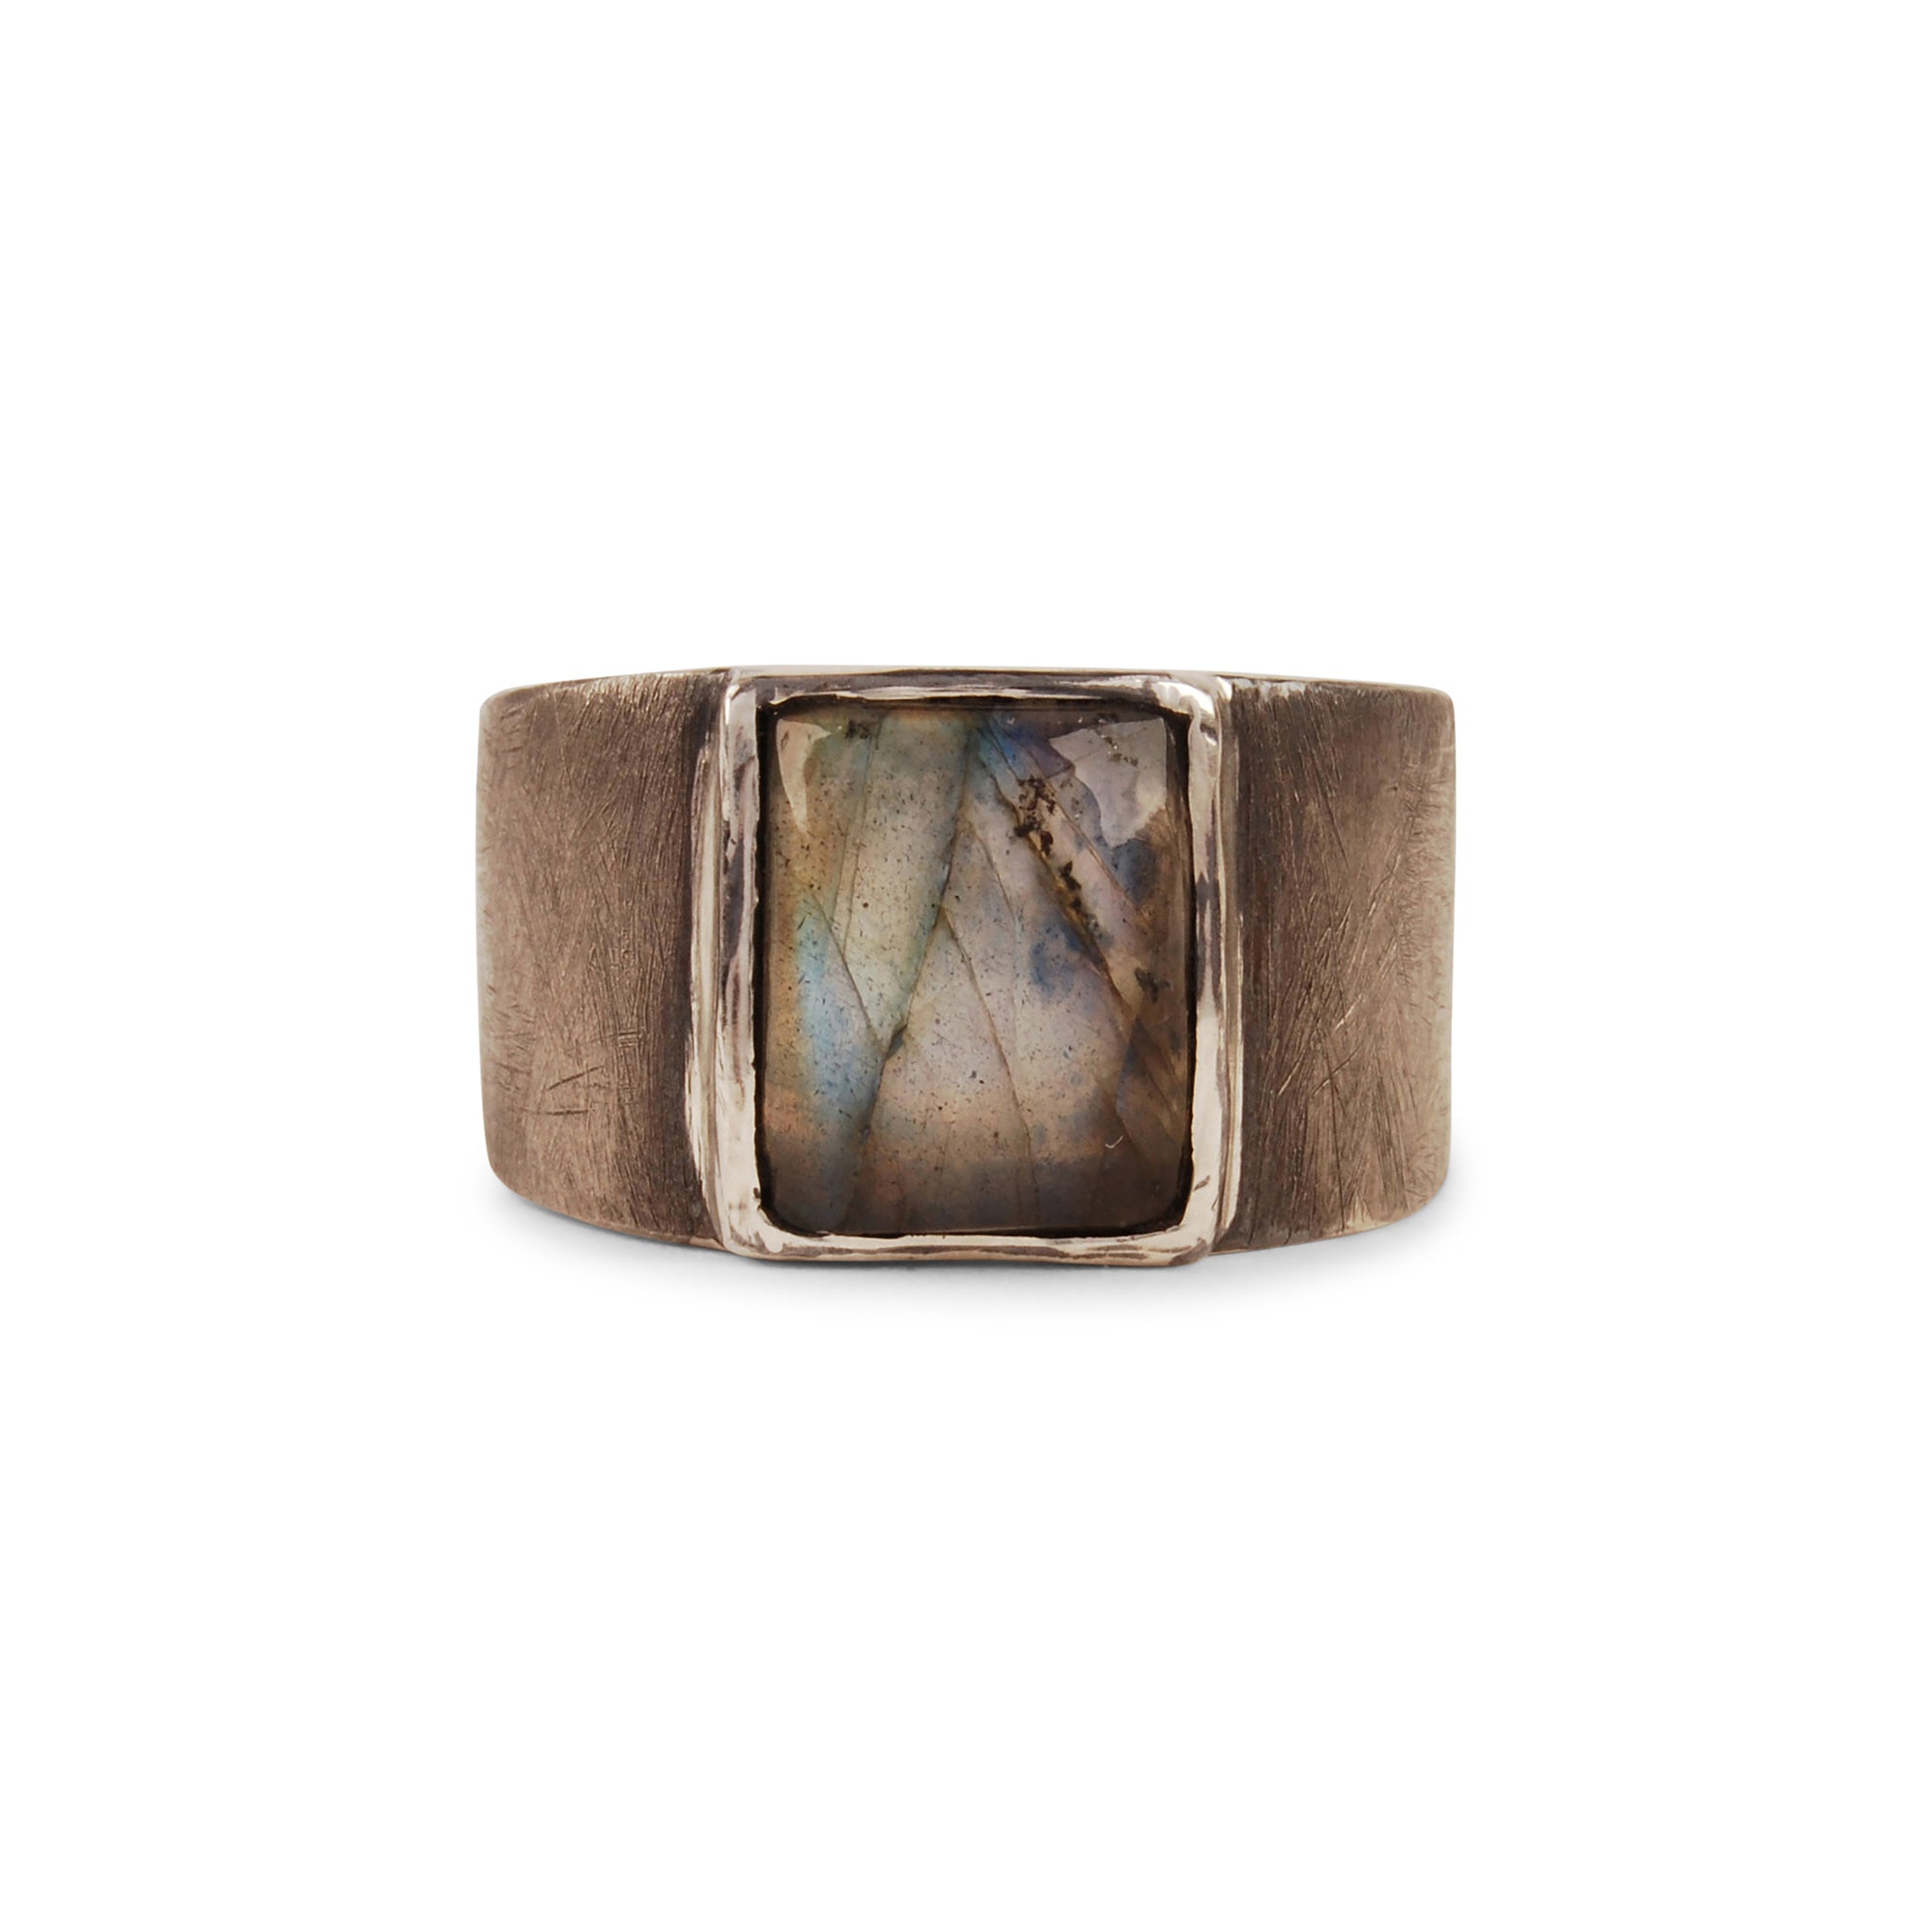 The Grit Rectangle Ring features a rectangular bezel set cabochon stone in your choice of labradorite or lapis